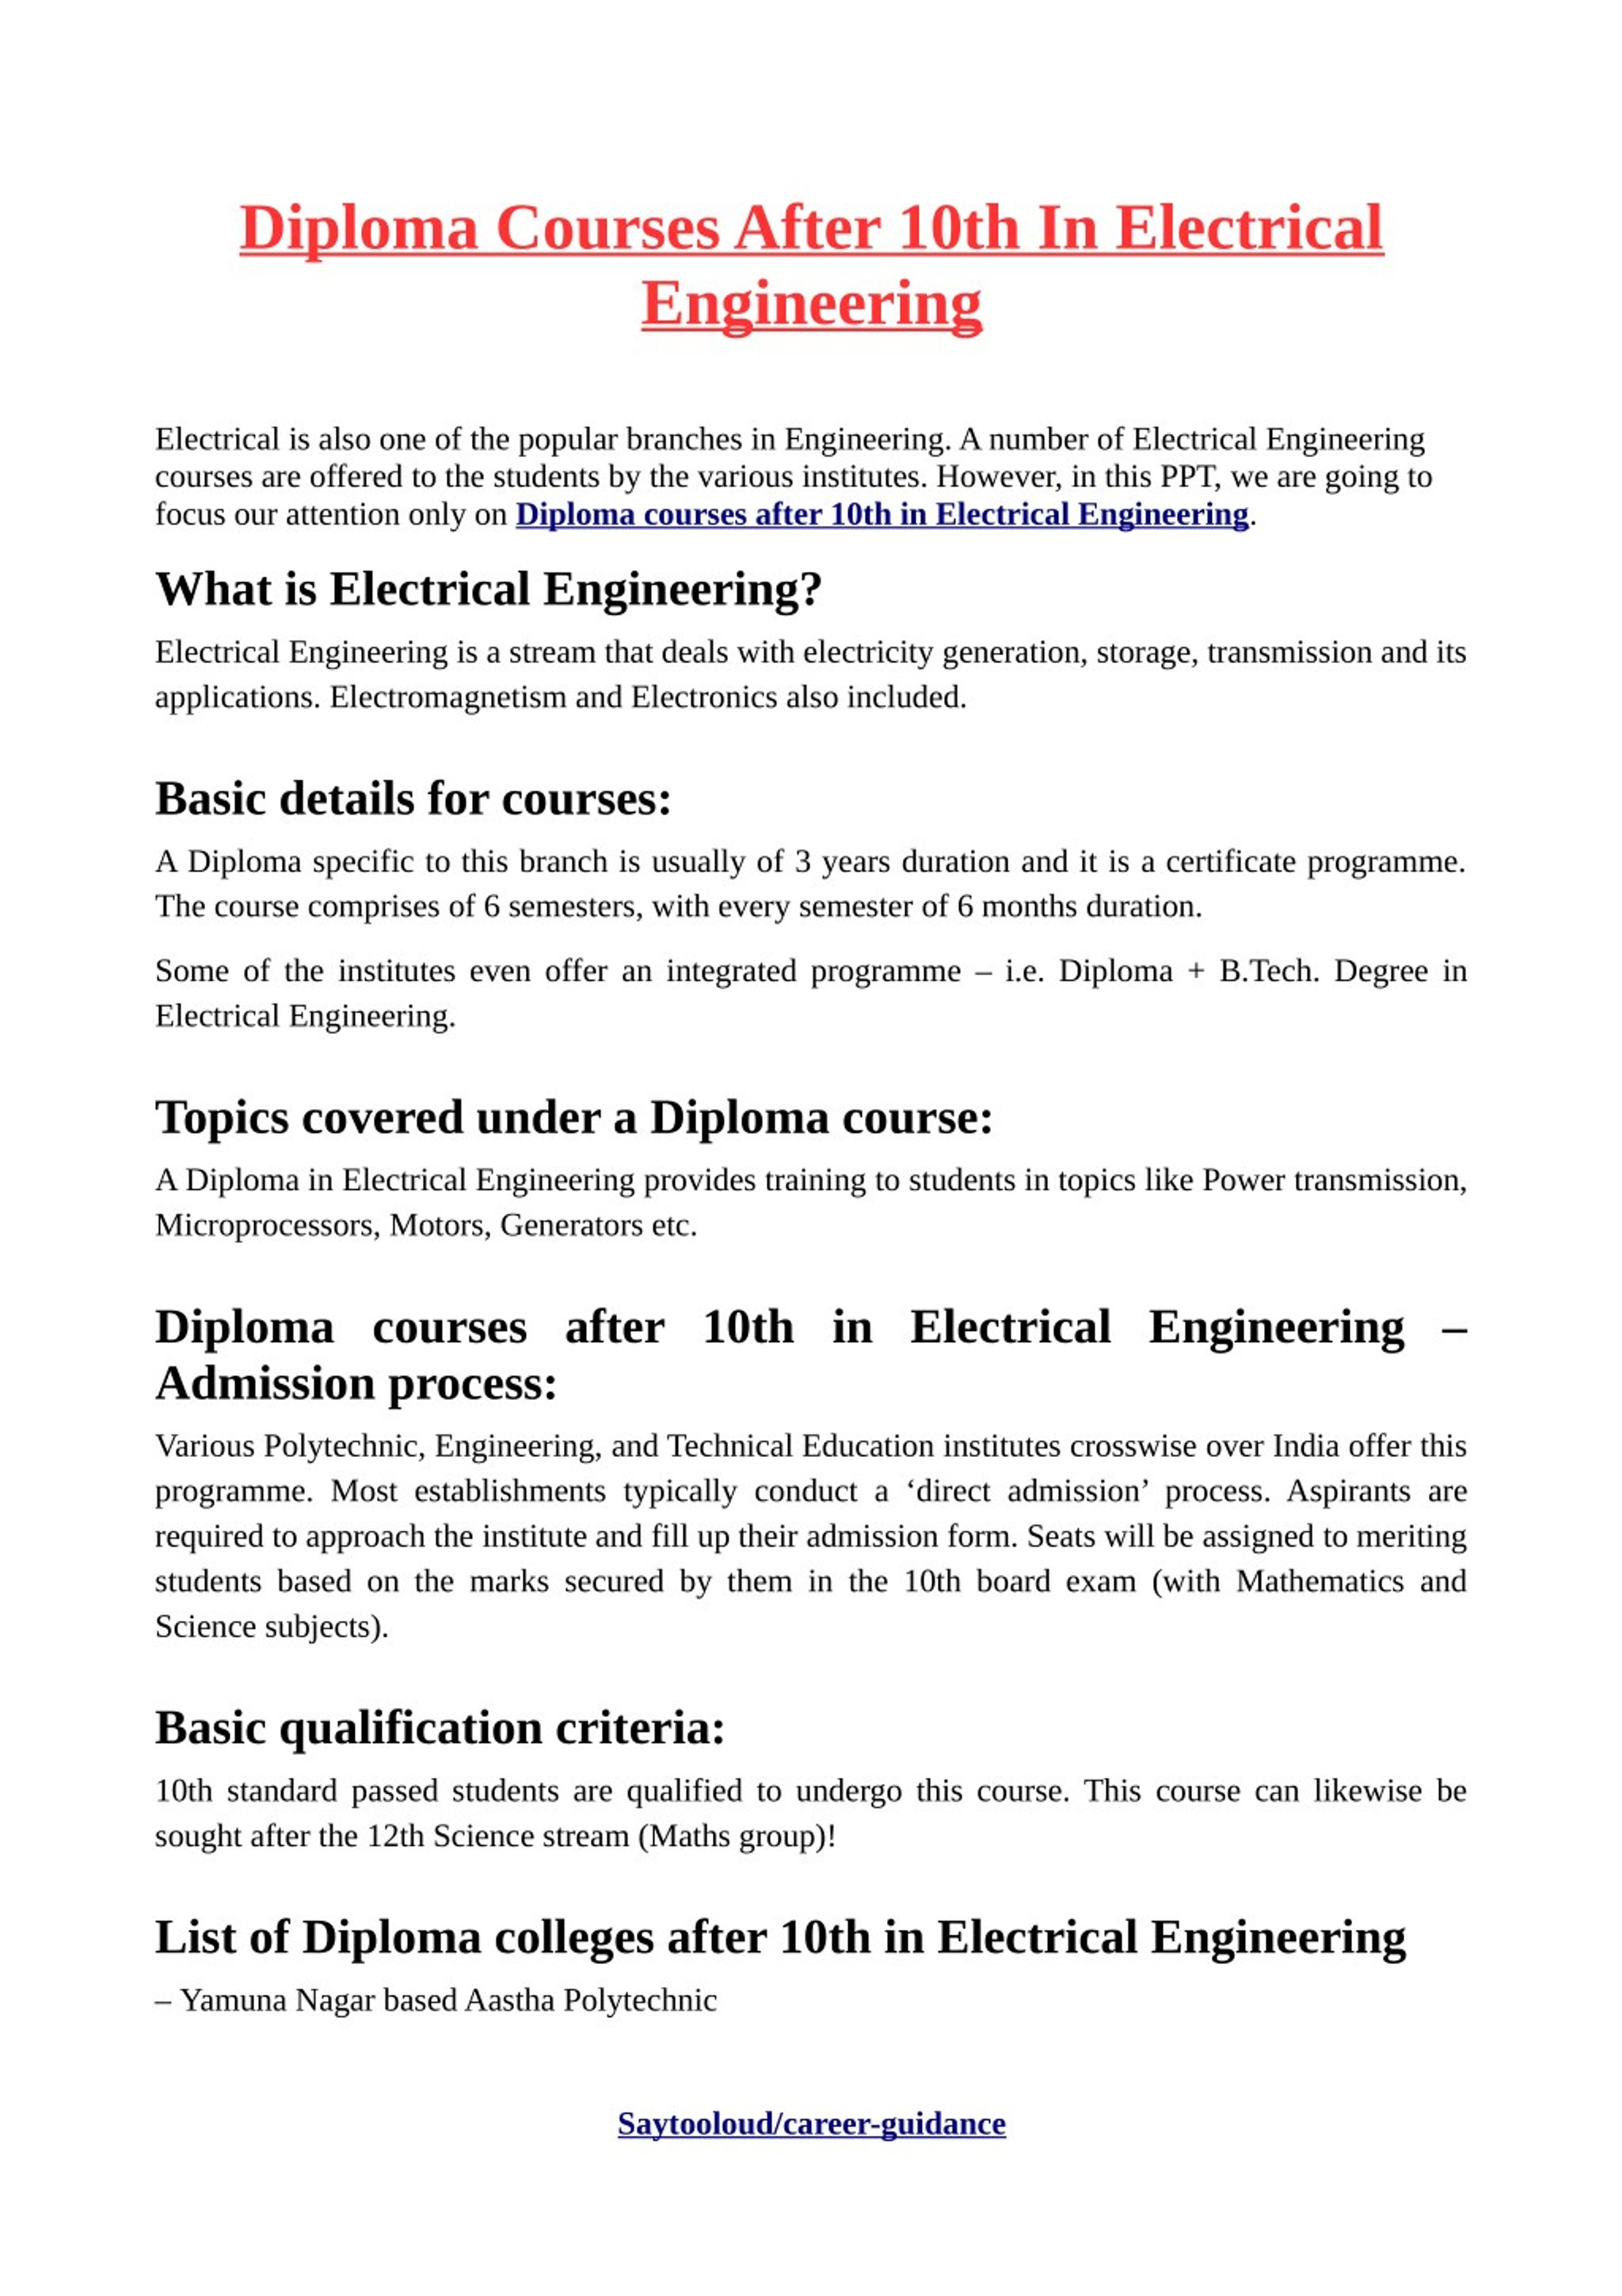 Ppt Diploma Courses After 10th In Electrical Engineering Powerpoint Presentation Id 7943879